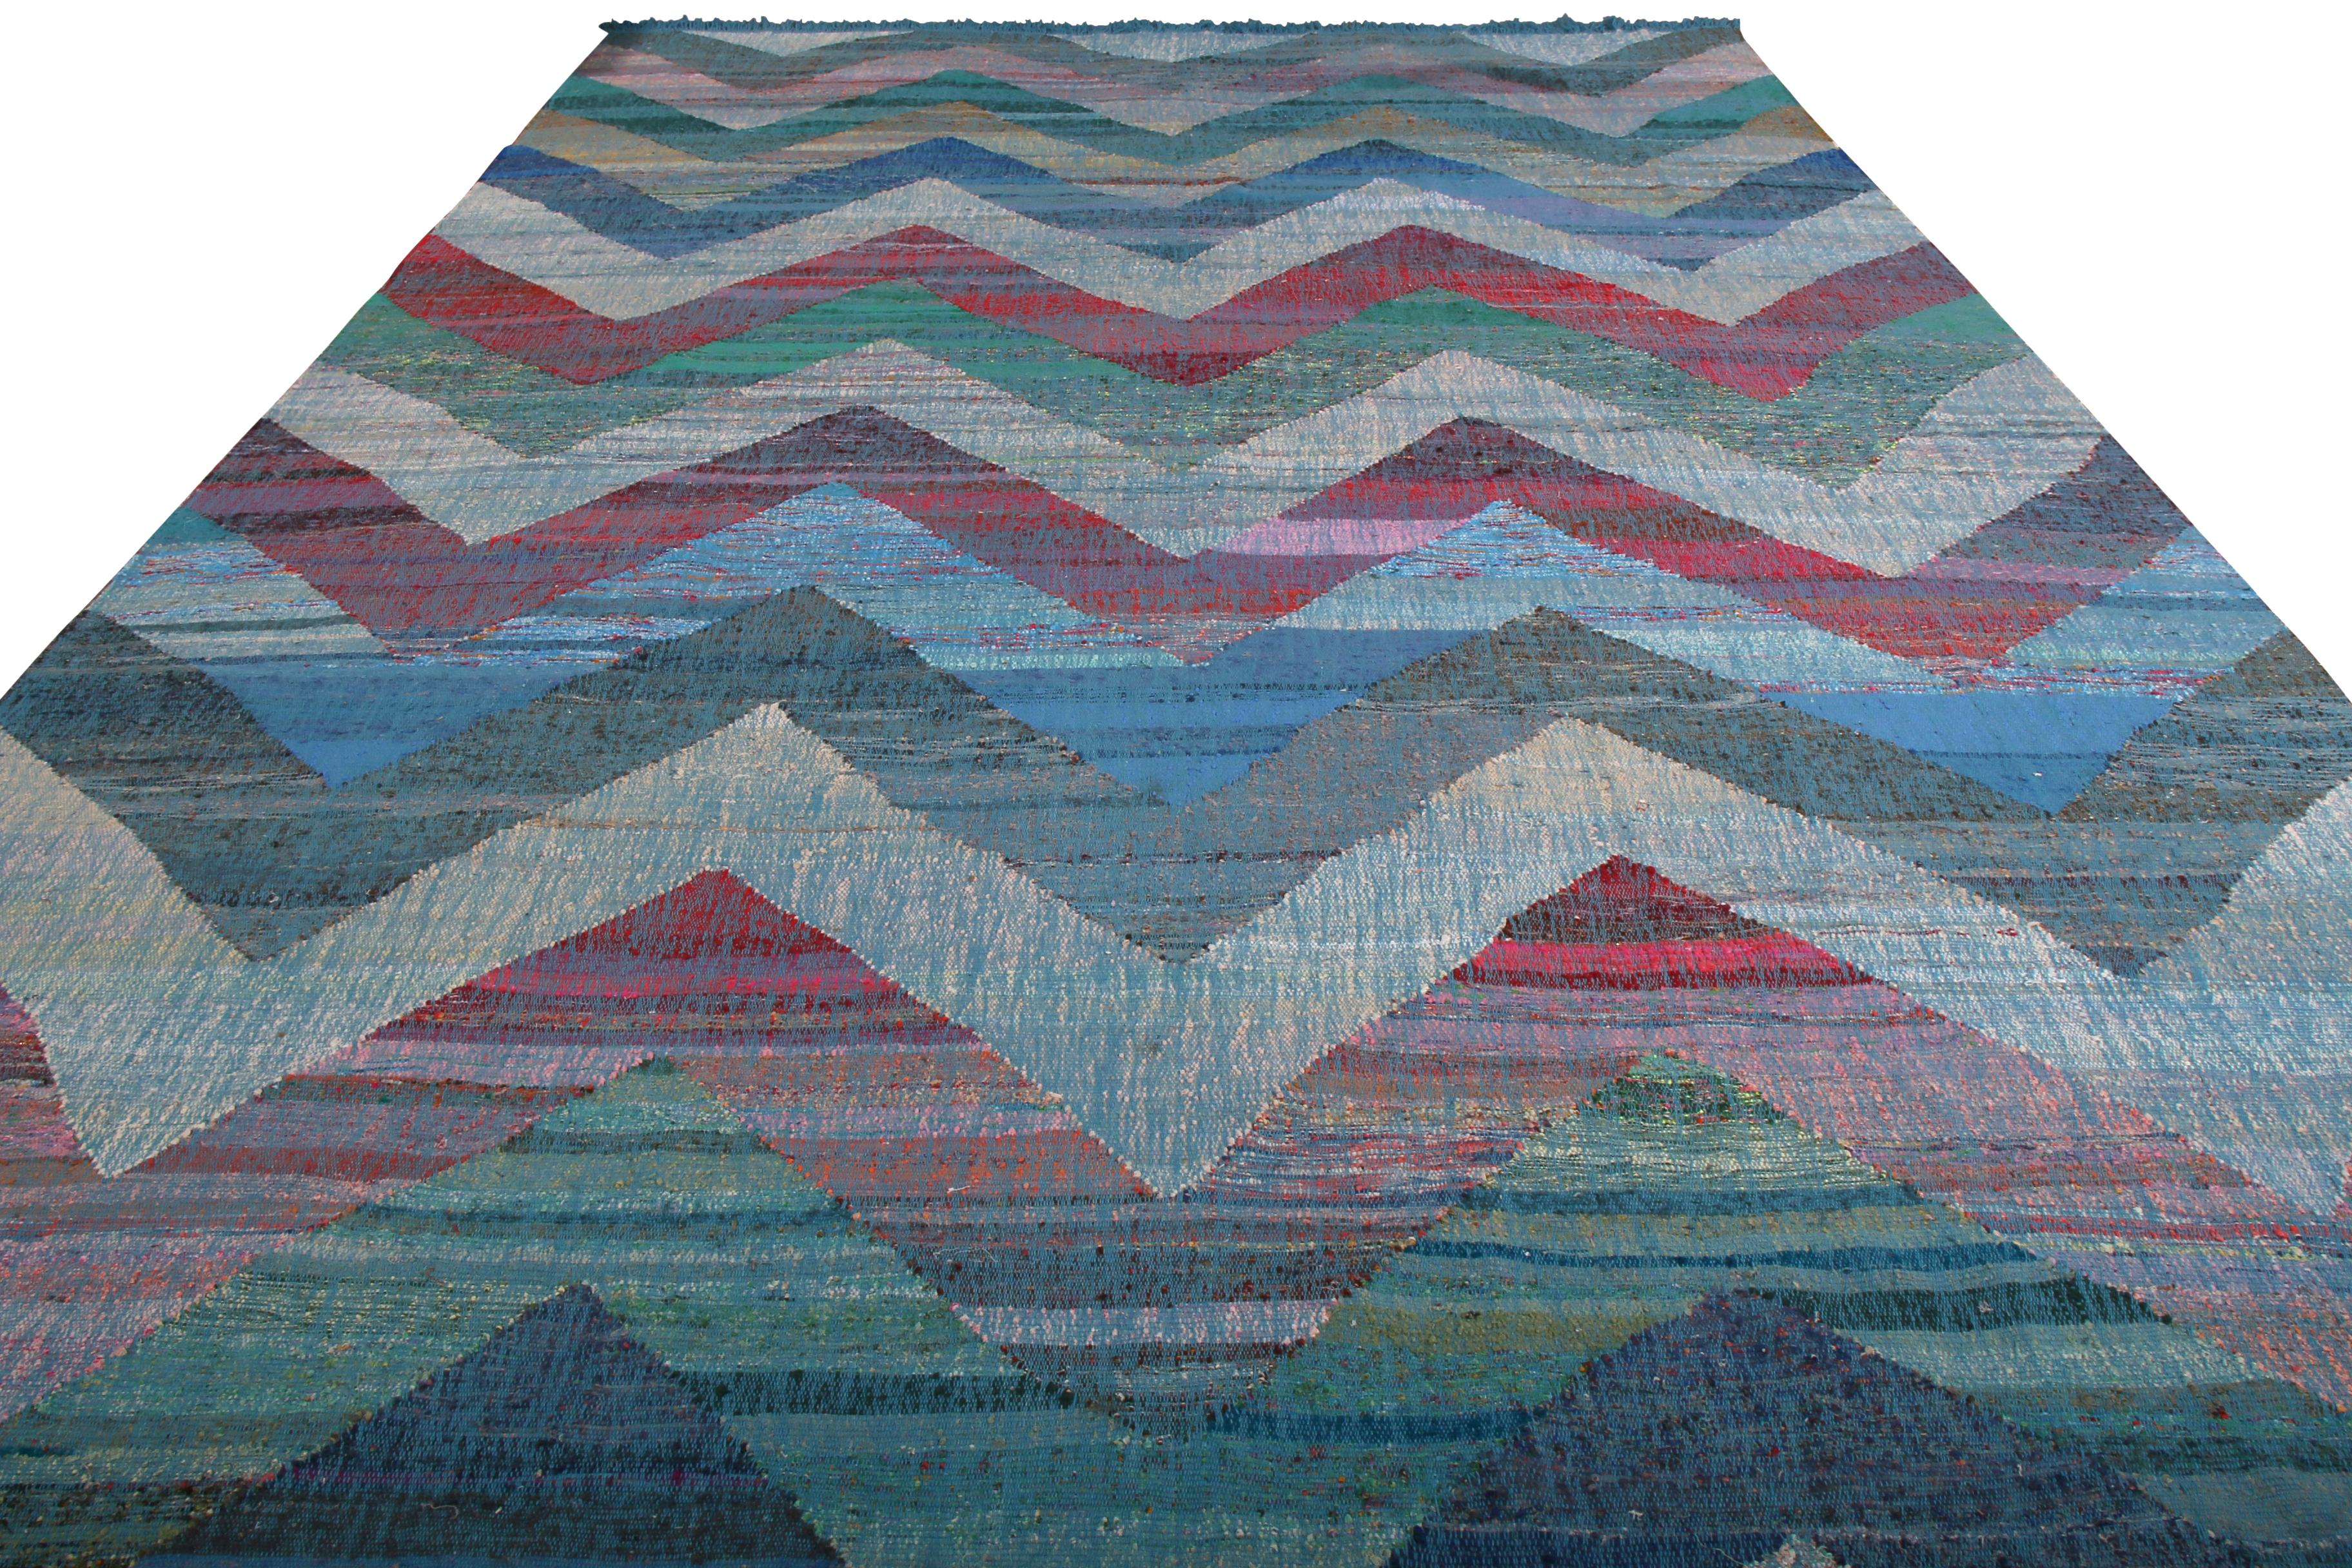 This modern Kilim represents a selection of distinct new patterns joining Rug & Kilim’s new and modern collection, uniquely handwoven from the yarns of Classic textiles and Kilims to create this transitional flat-weave and its lively, varied